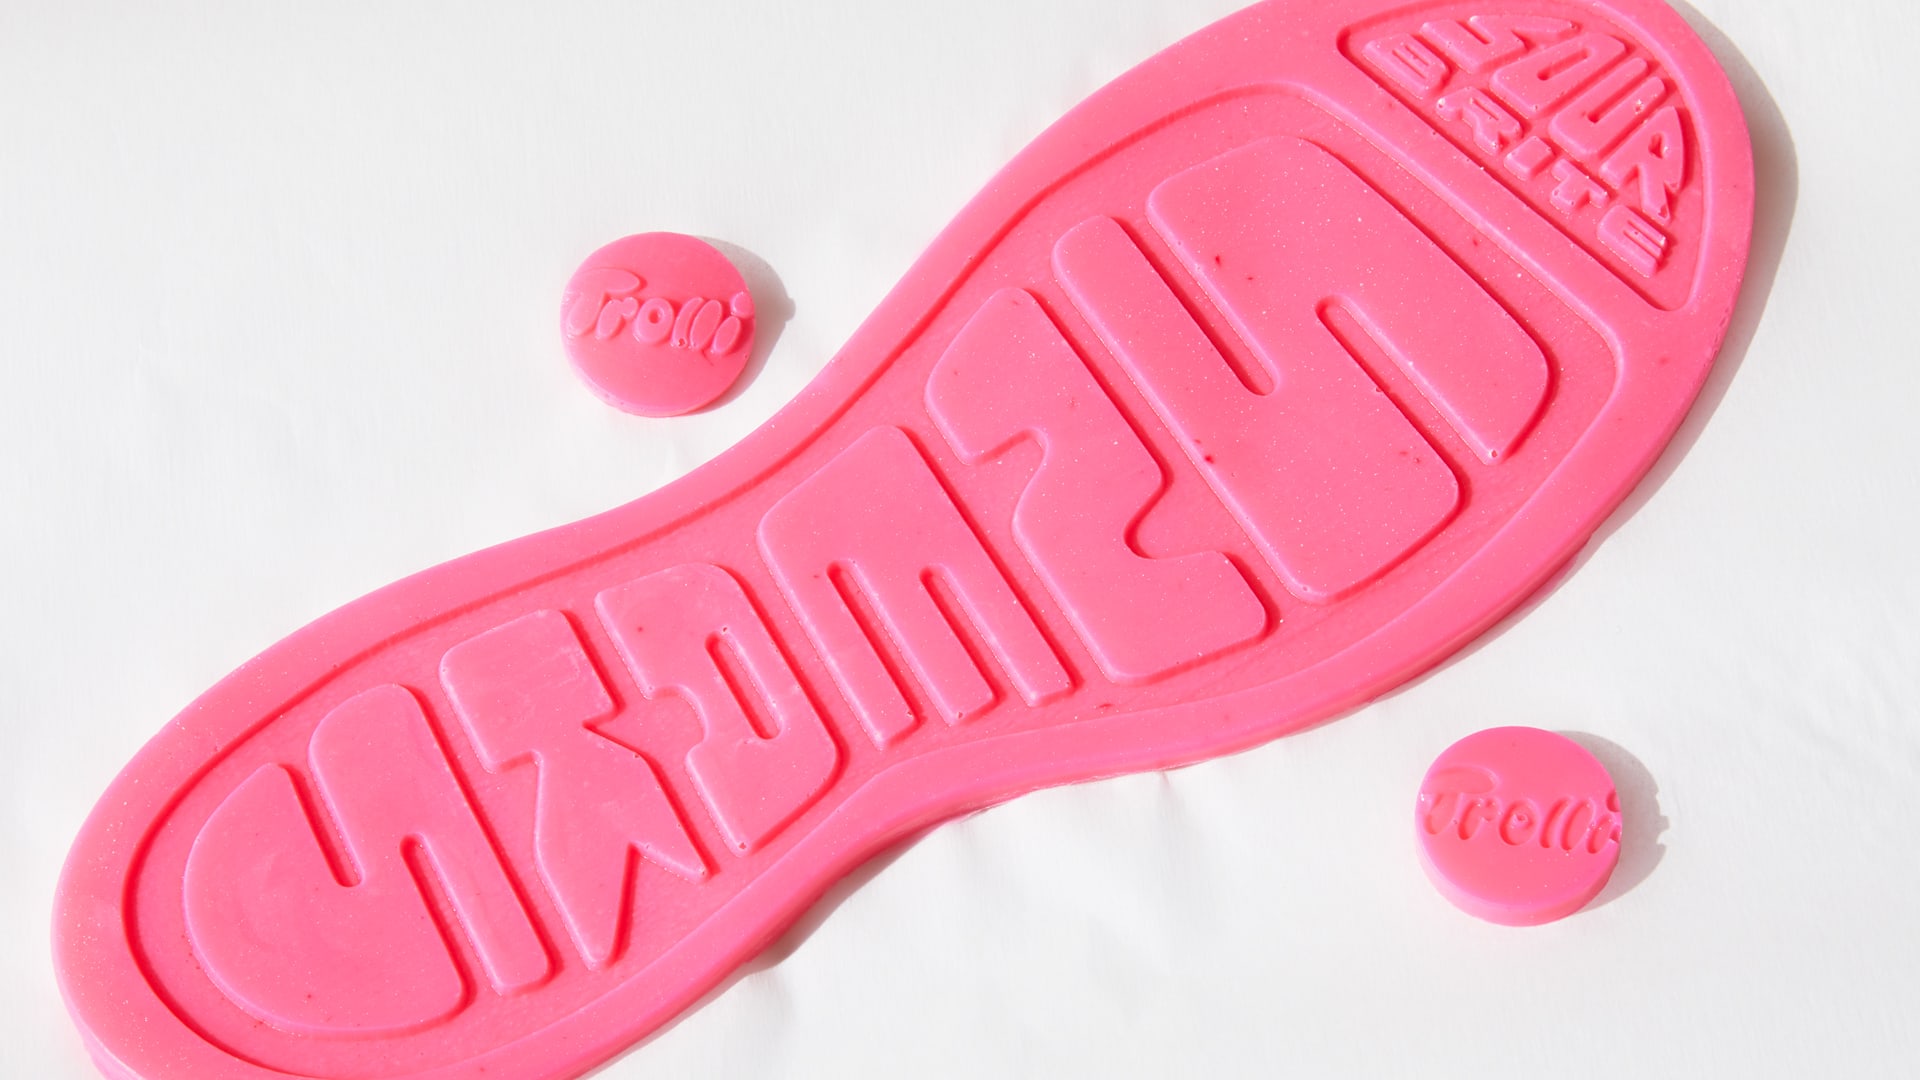 James Harden's sneakers are now immortalized in candy form